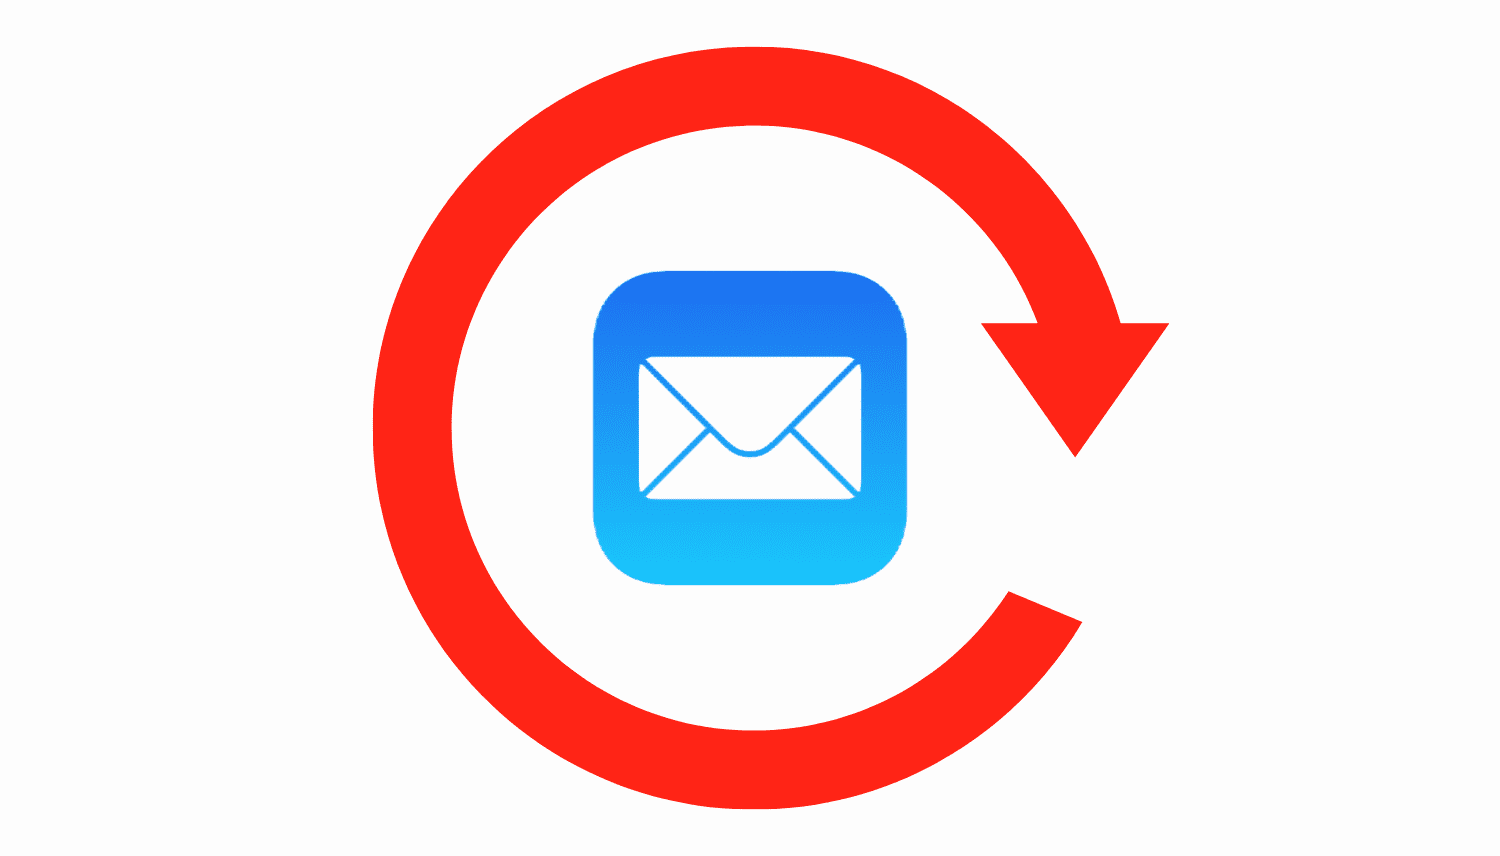 Apple Mail app icon inside a red curved arrow showing it is reset